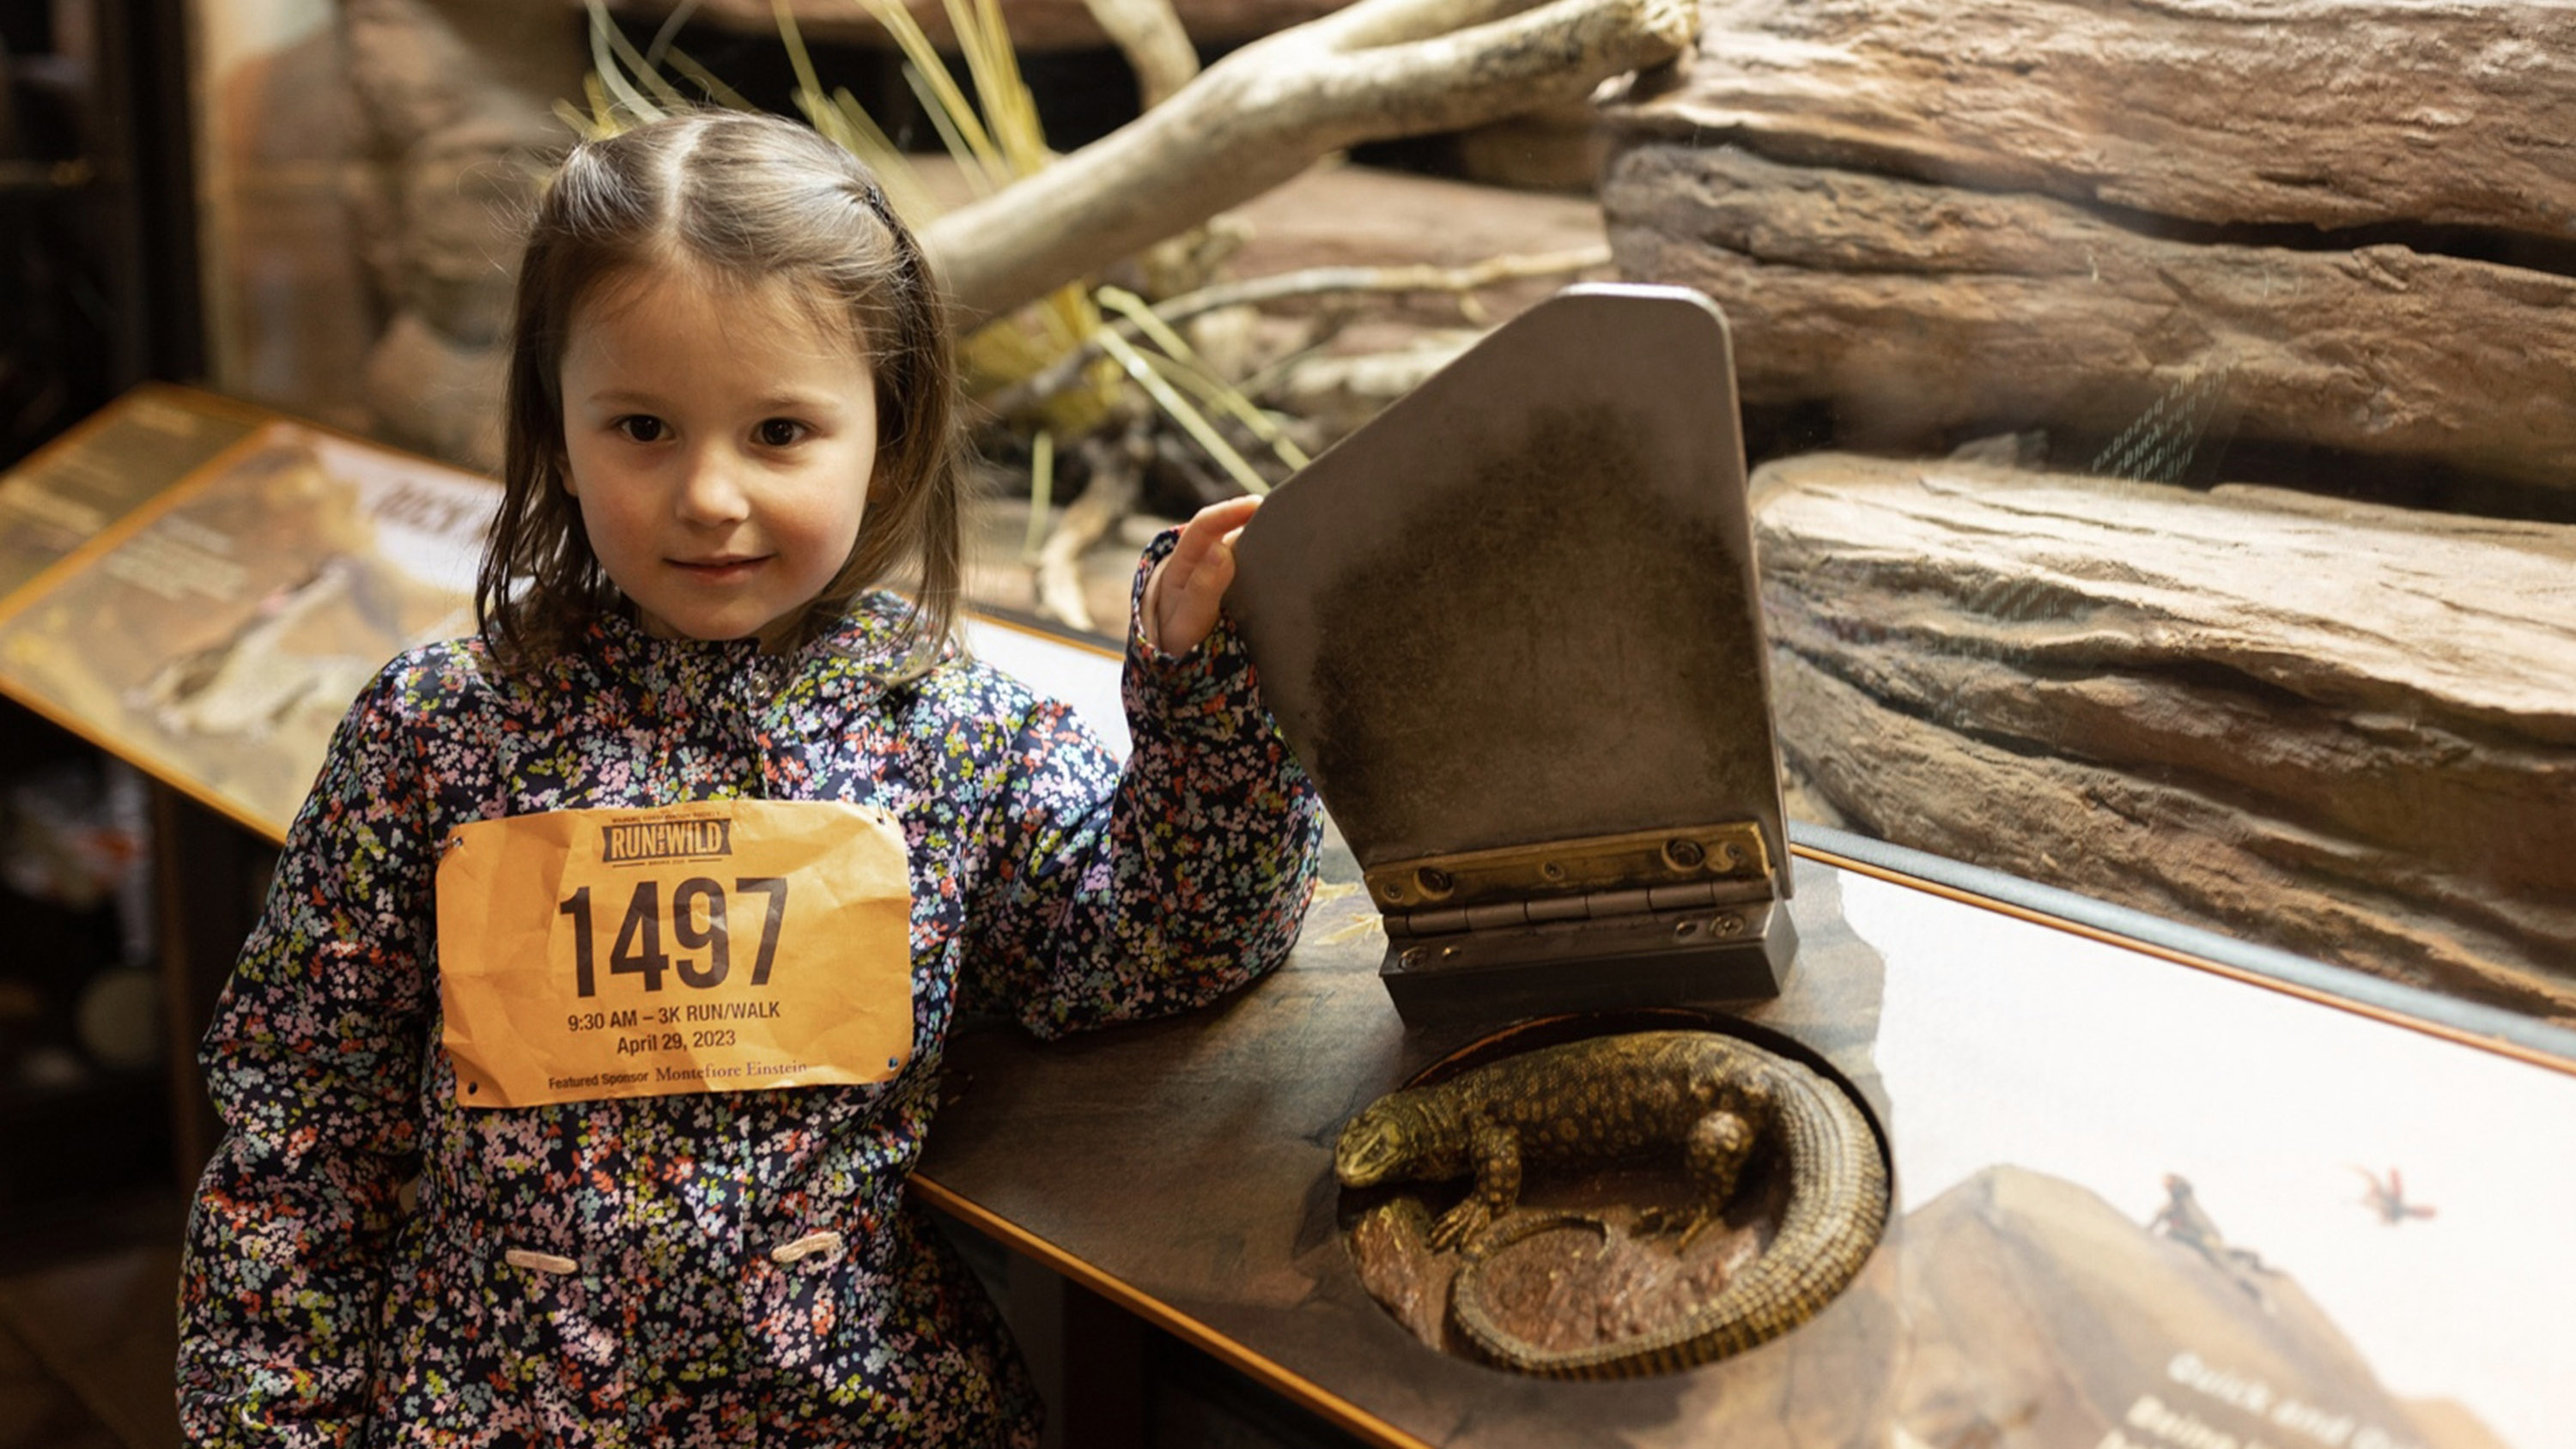 A young runner enjoys an exhibit at the zoo.